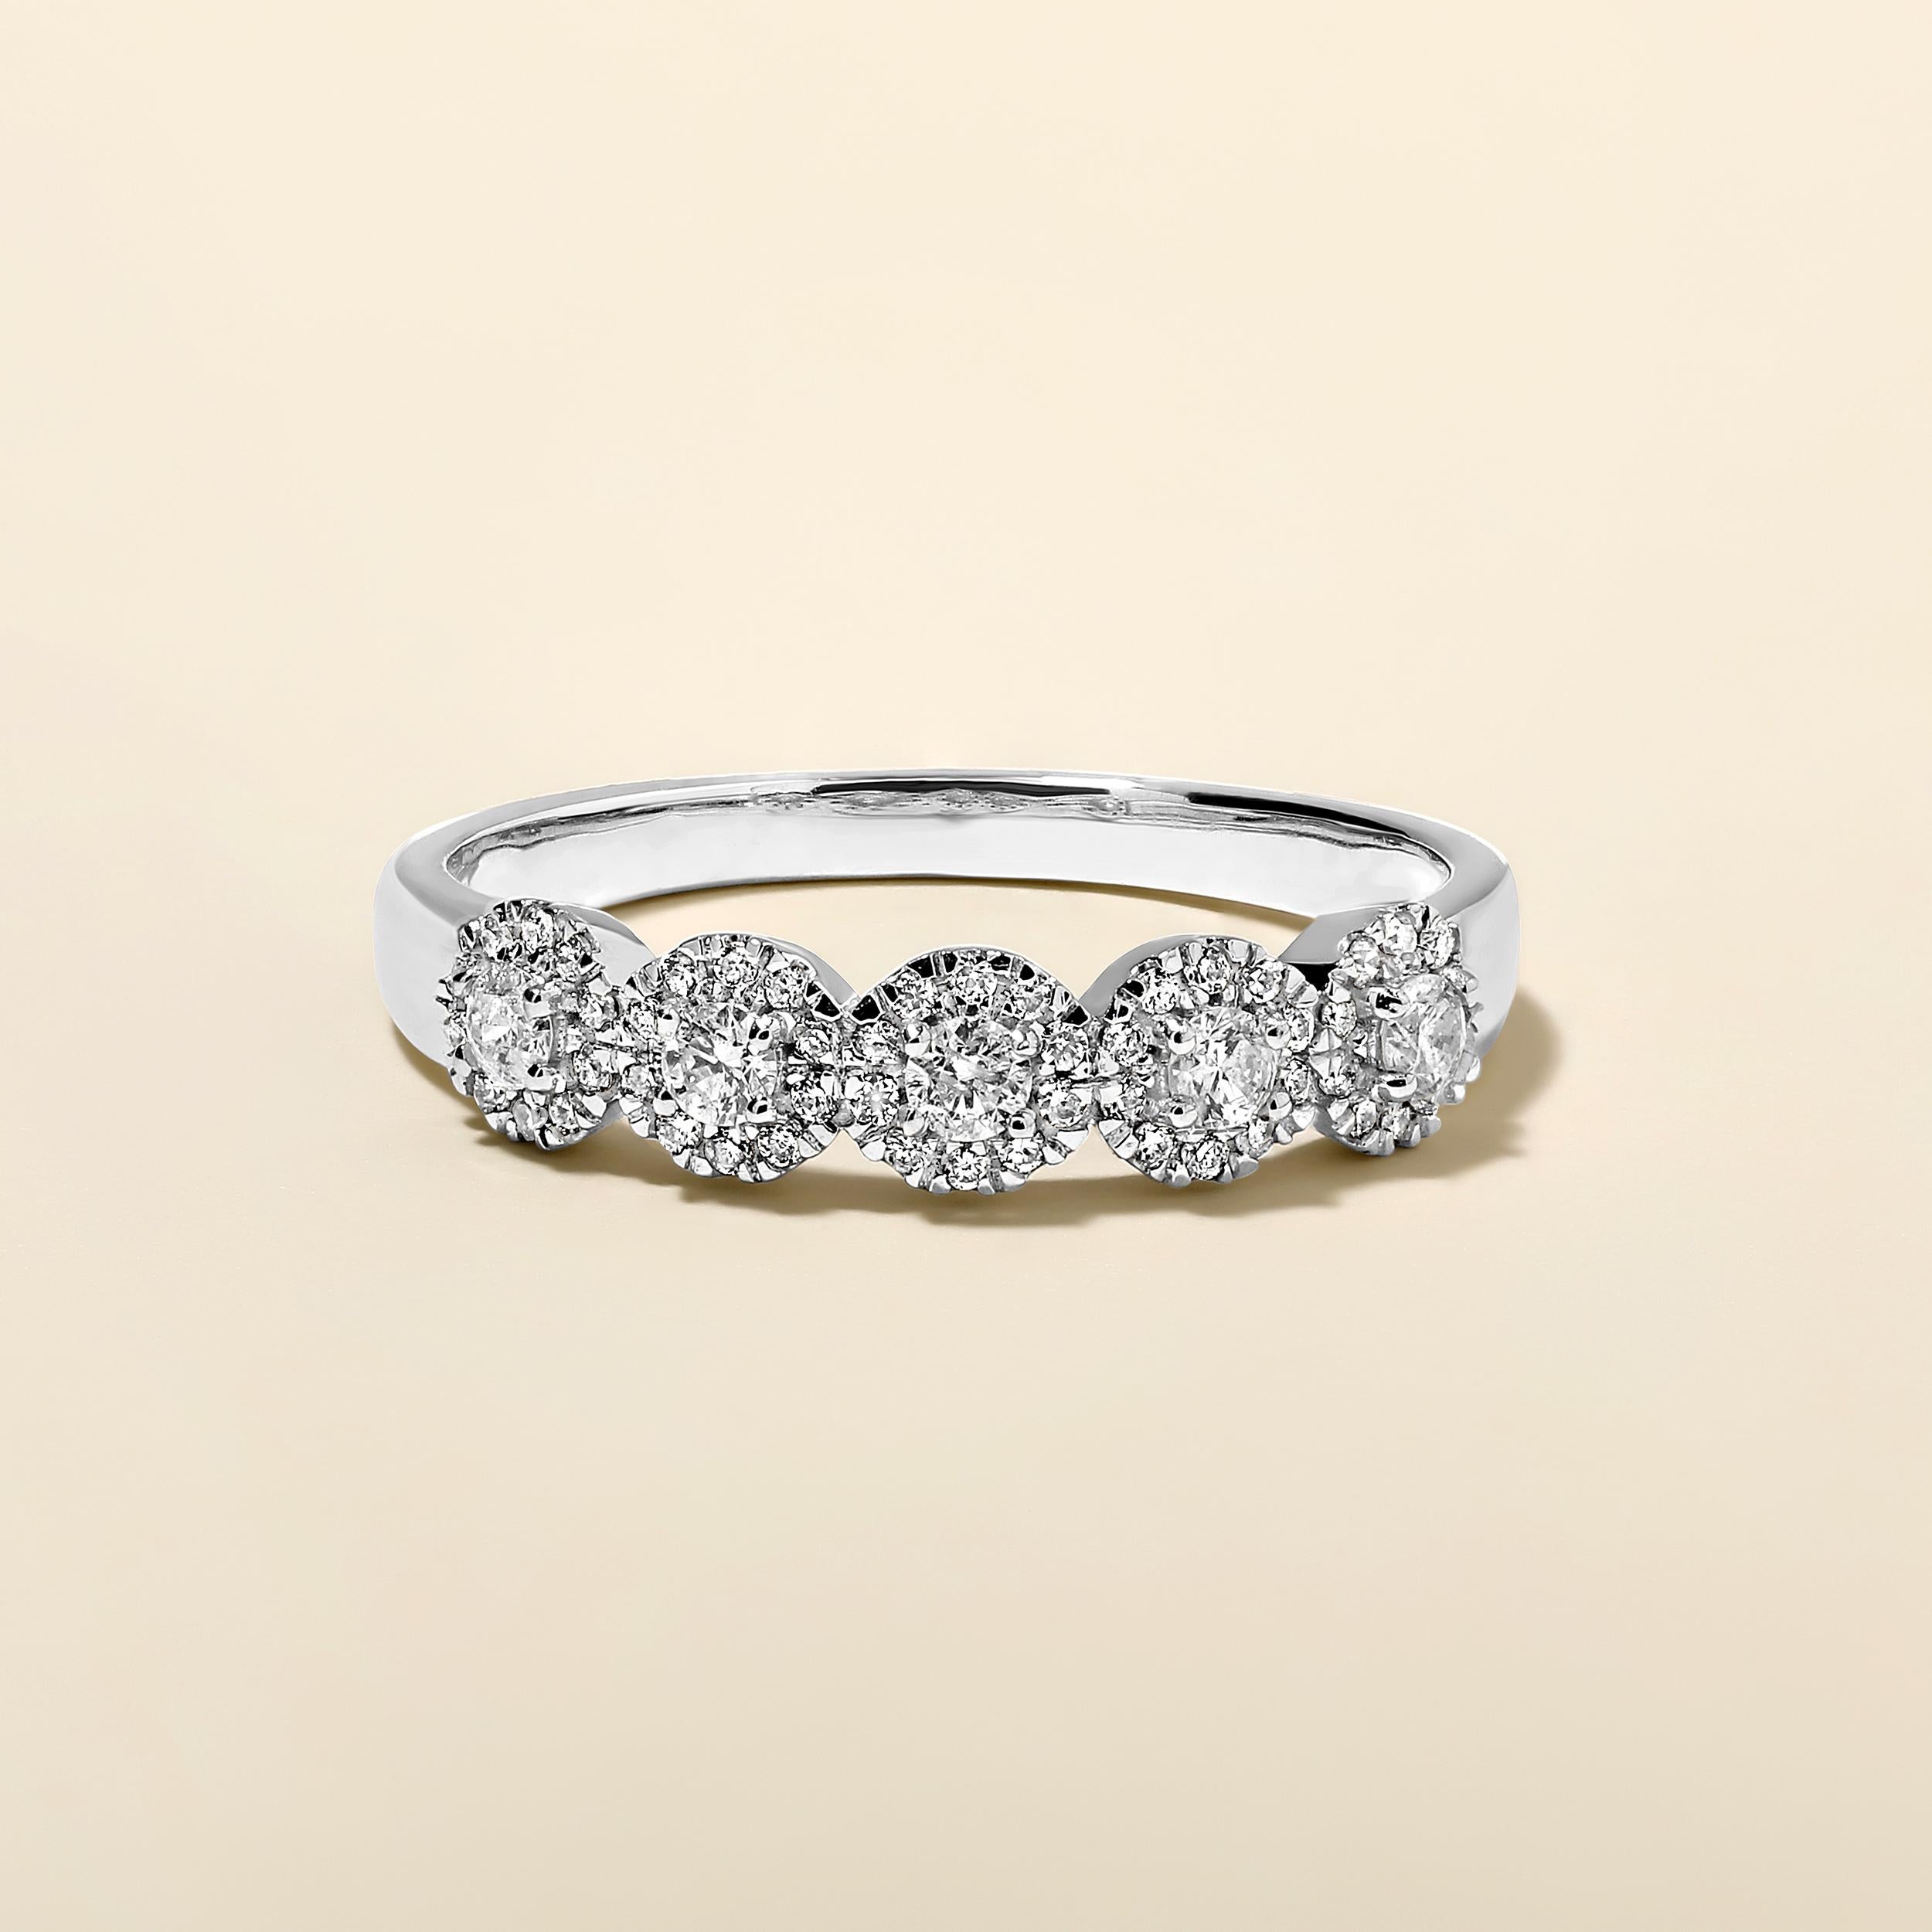 Ring Size: US 7

Crafted in 2.54 grams of 14K White Gold, the ring contains 55 stones of Round Natural Diamonds with a total of 0.34 carat in F-G color and I1-I2 clarity.

CONTEMPORARY AND TIMELESS ESSENCE: Crafted in 14-karat/18-karat with 100%